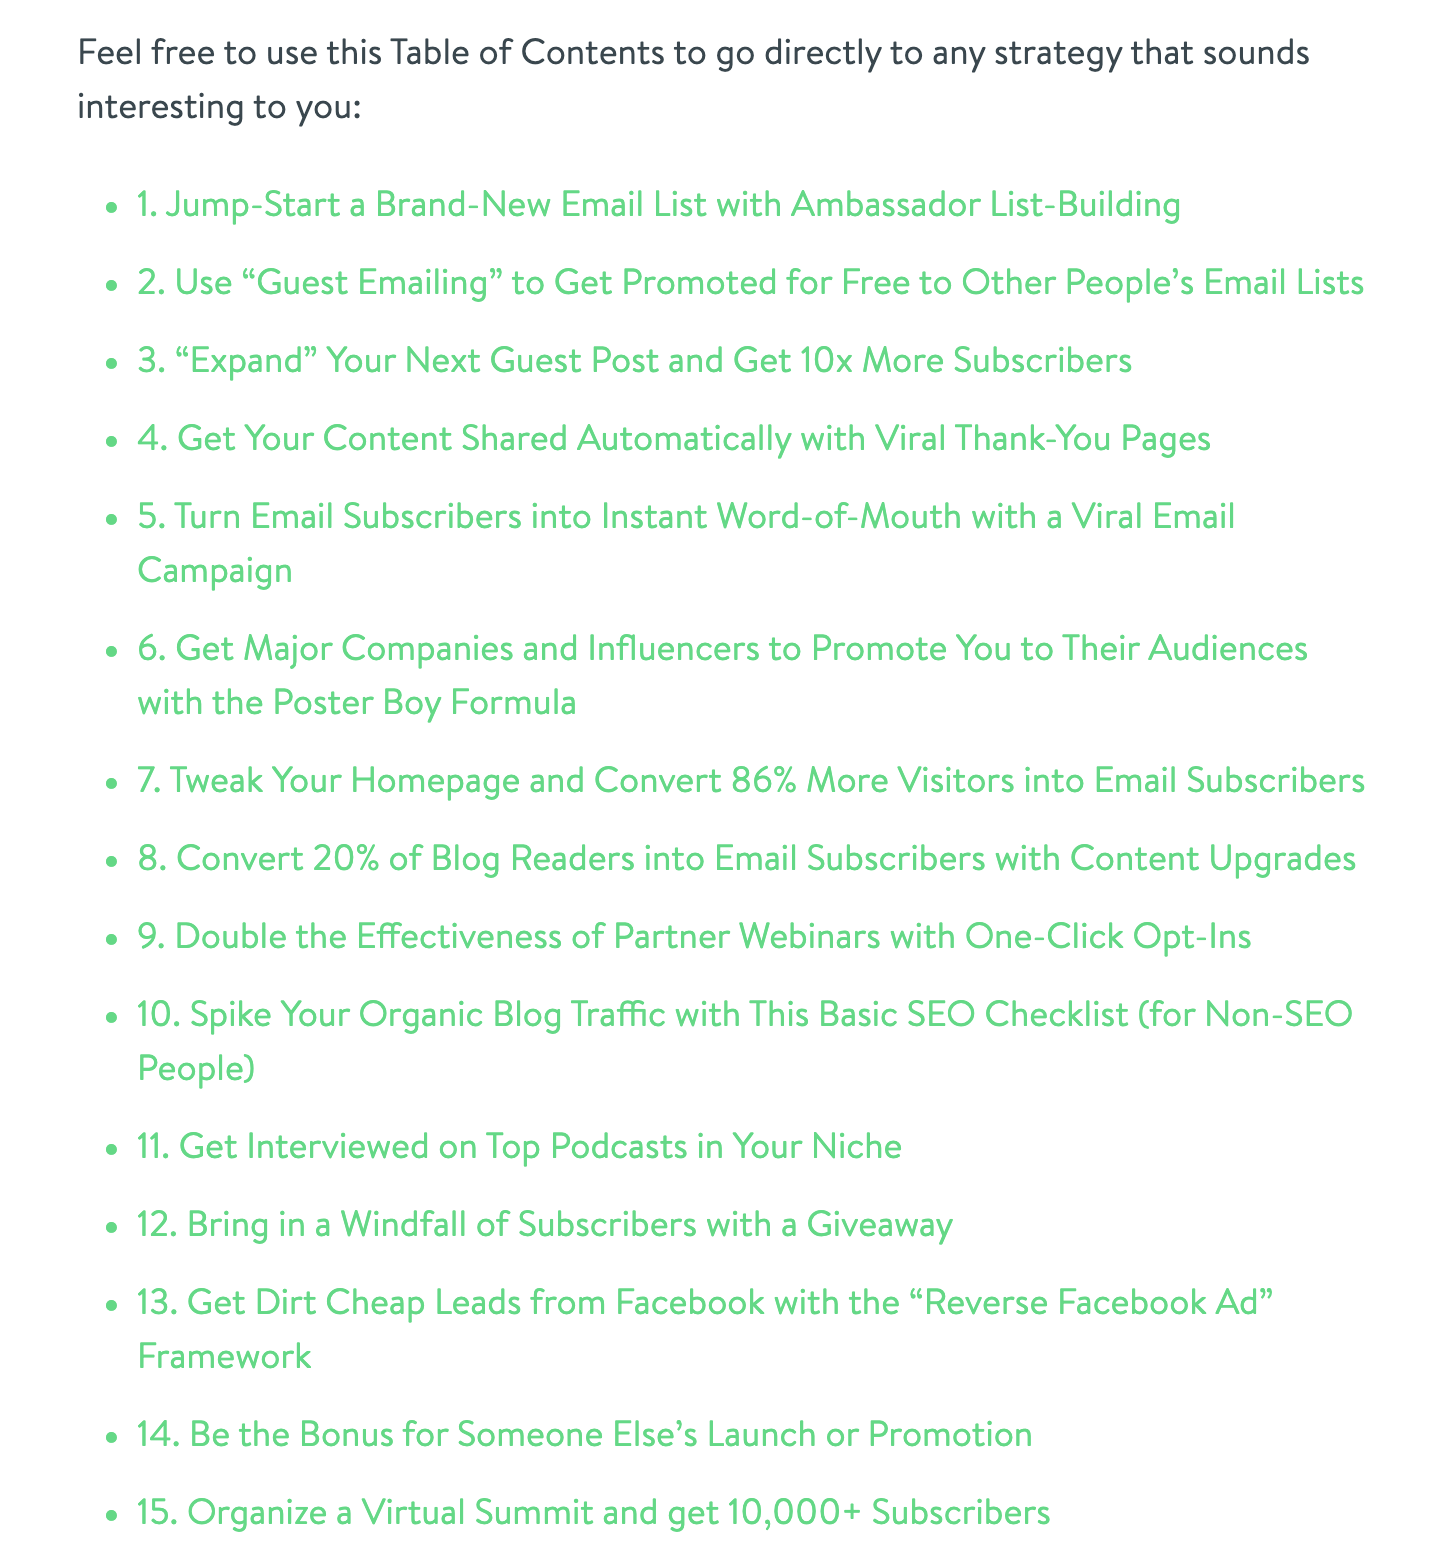 Table of Contents from Growth Tools: 15 tactics to grow an email list